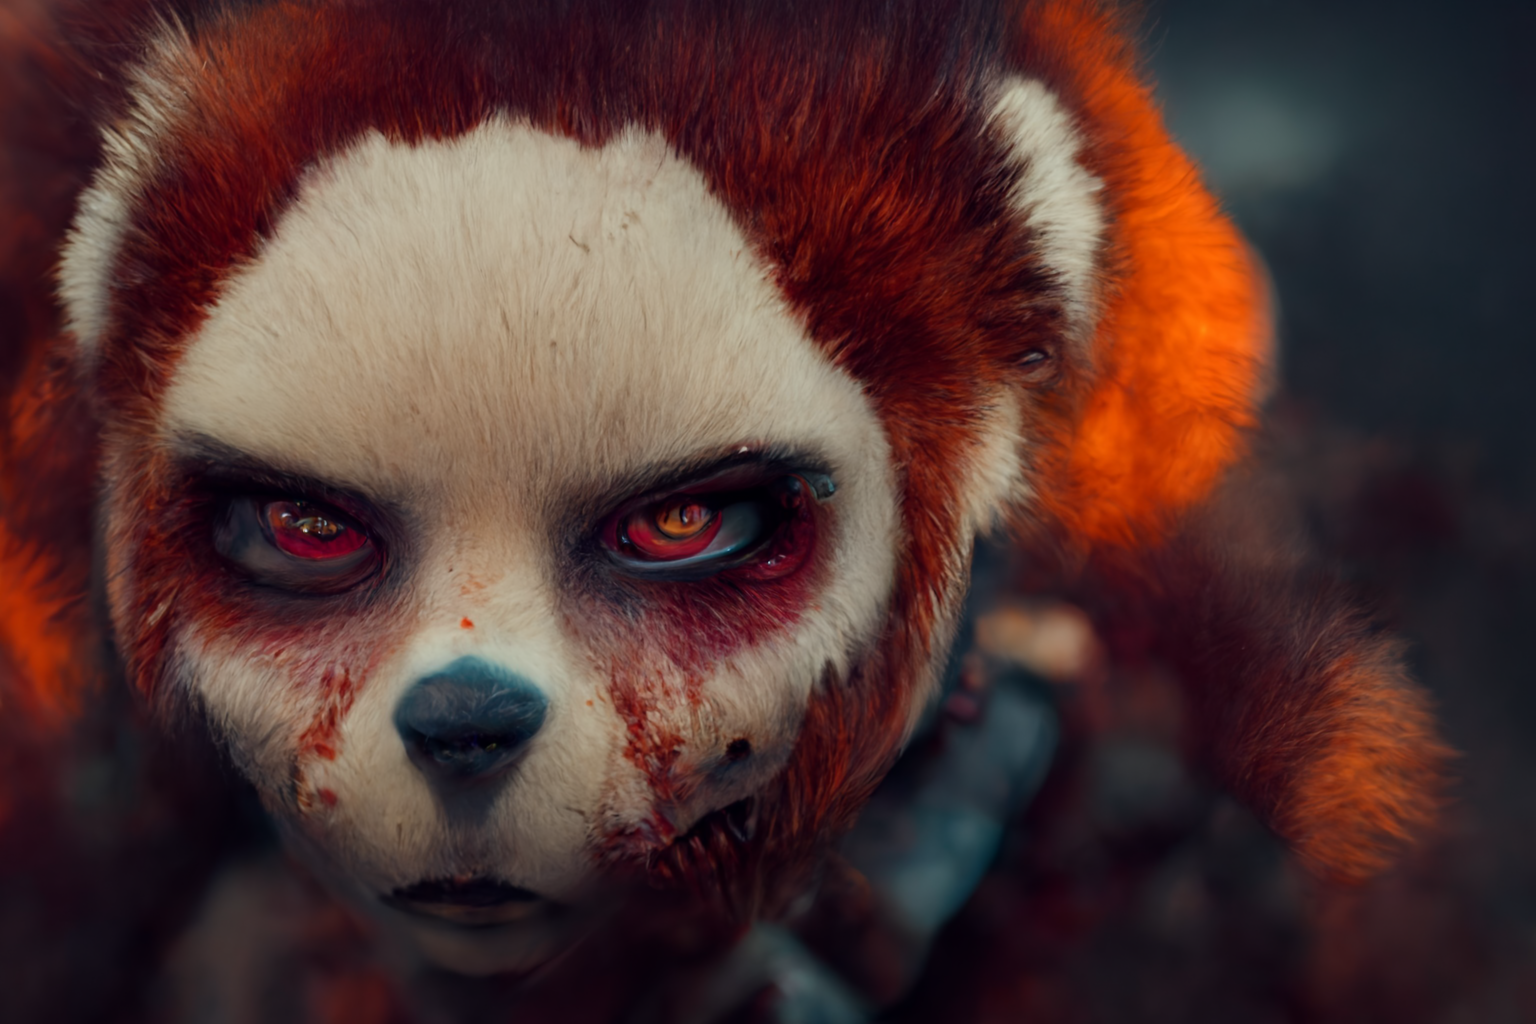 Displaying a file named Grunderwear_a_close_up_of_a_zombie_red_panda_with_a_Anima_ex_Ma_0b7736c0-8a77-47b1-b446-c19f6f6f0fe5.png